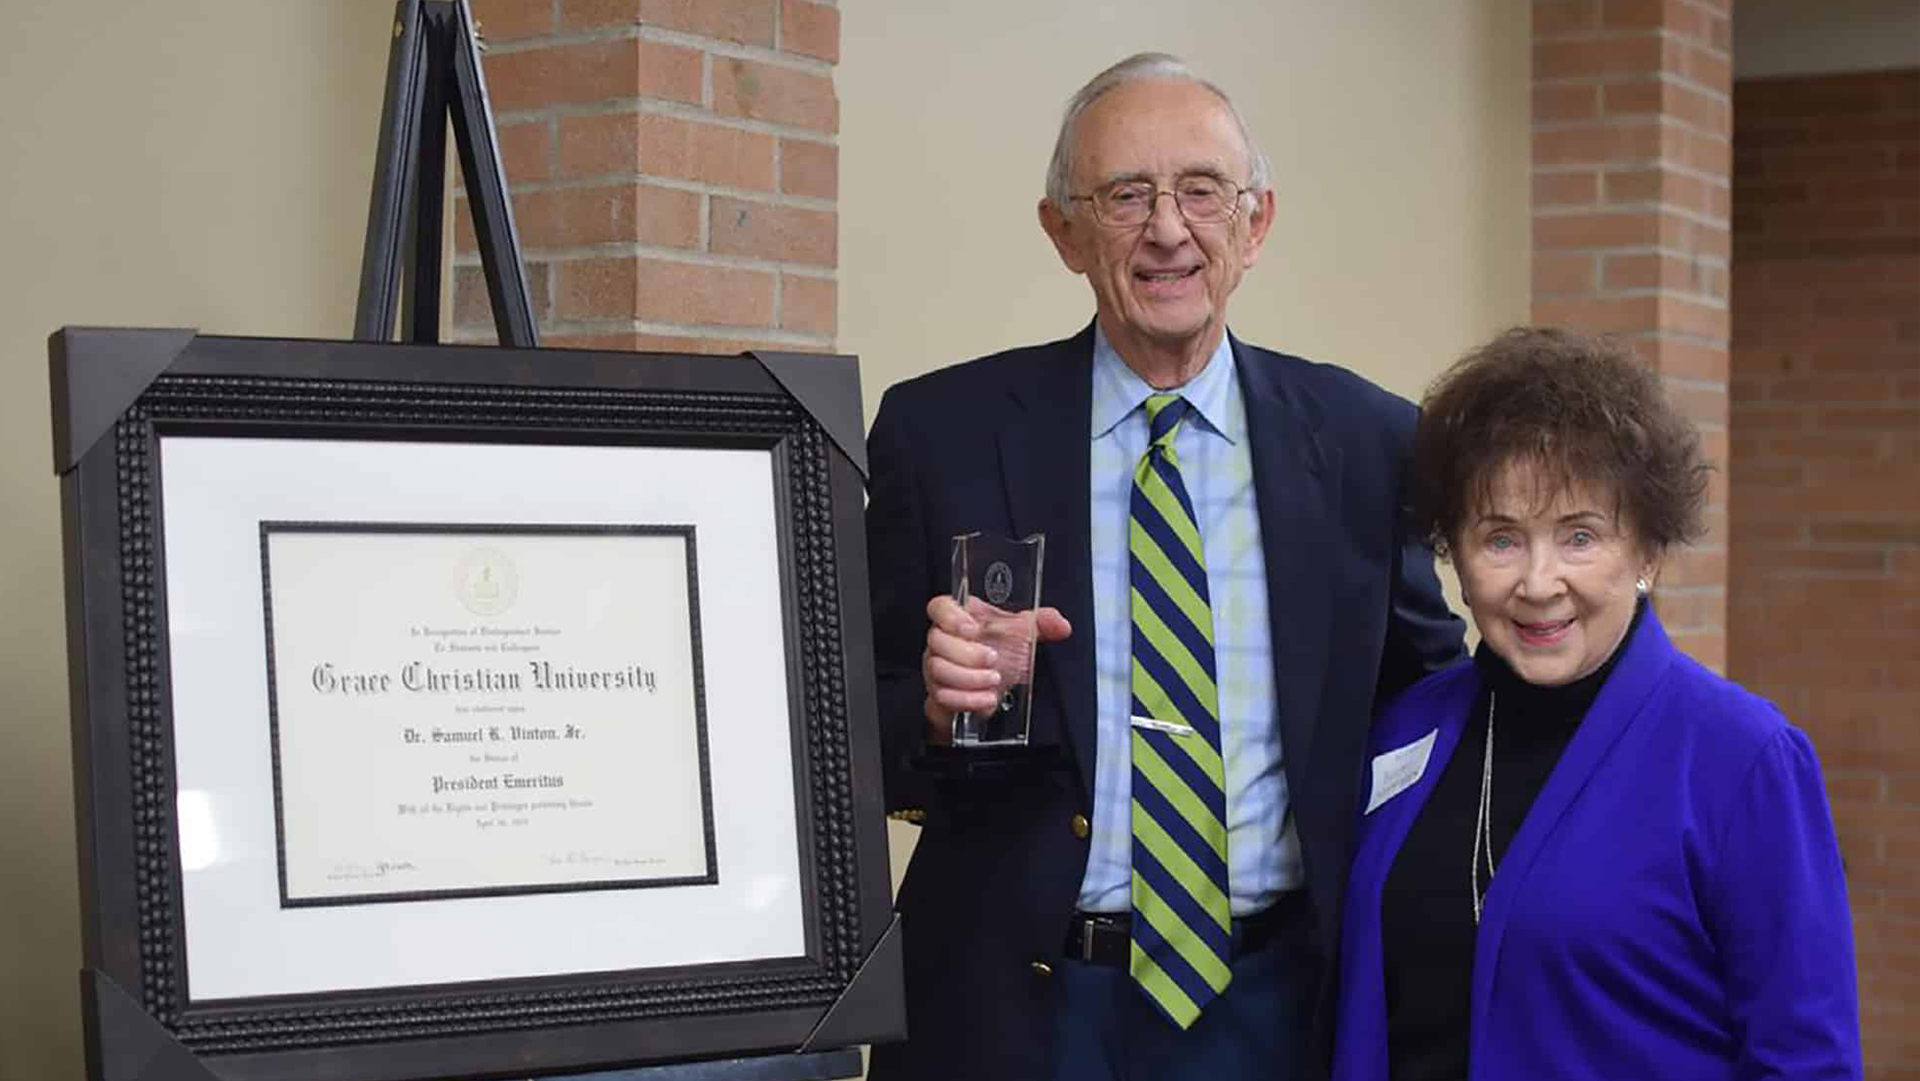 Dr. Sam Vinton as he was presented with President Emeritus status, with his wife, Becky